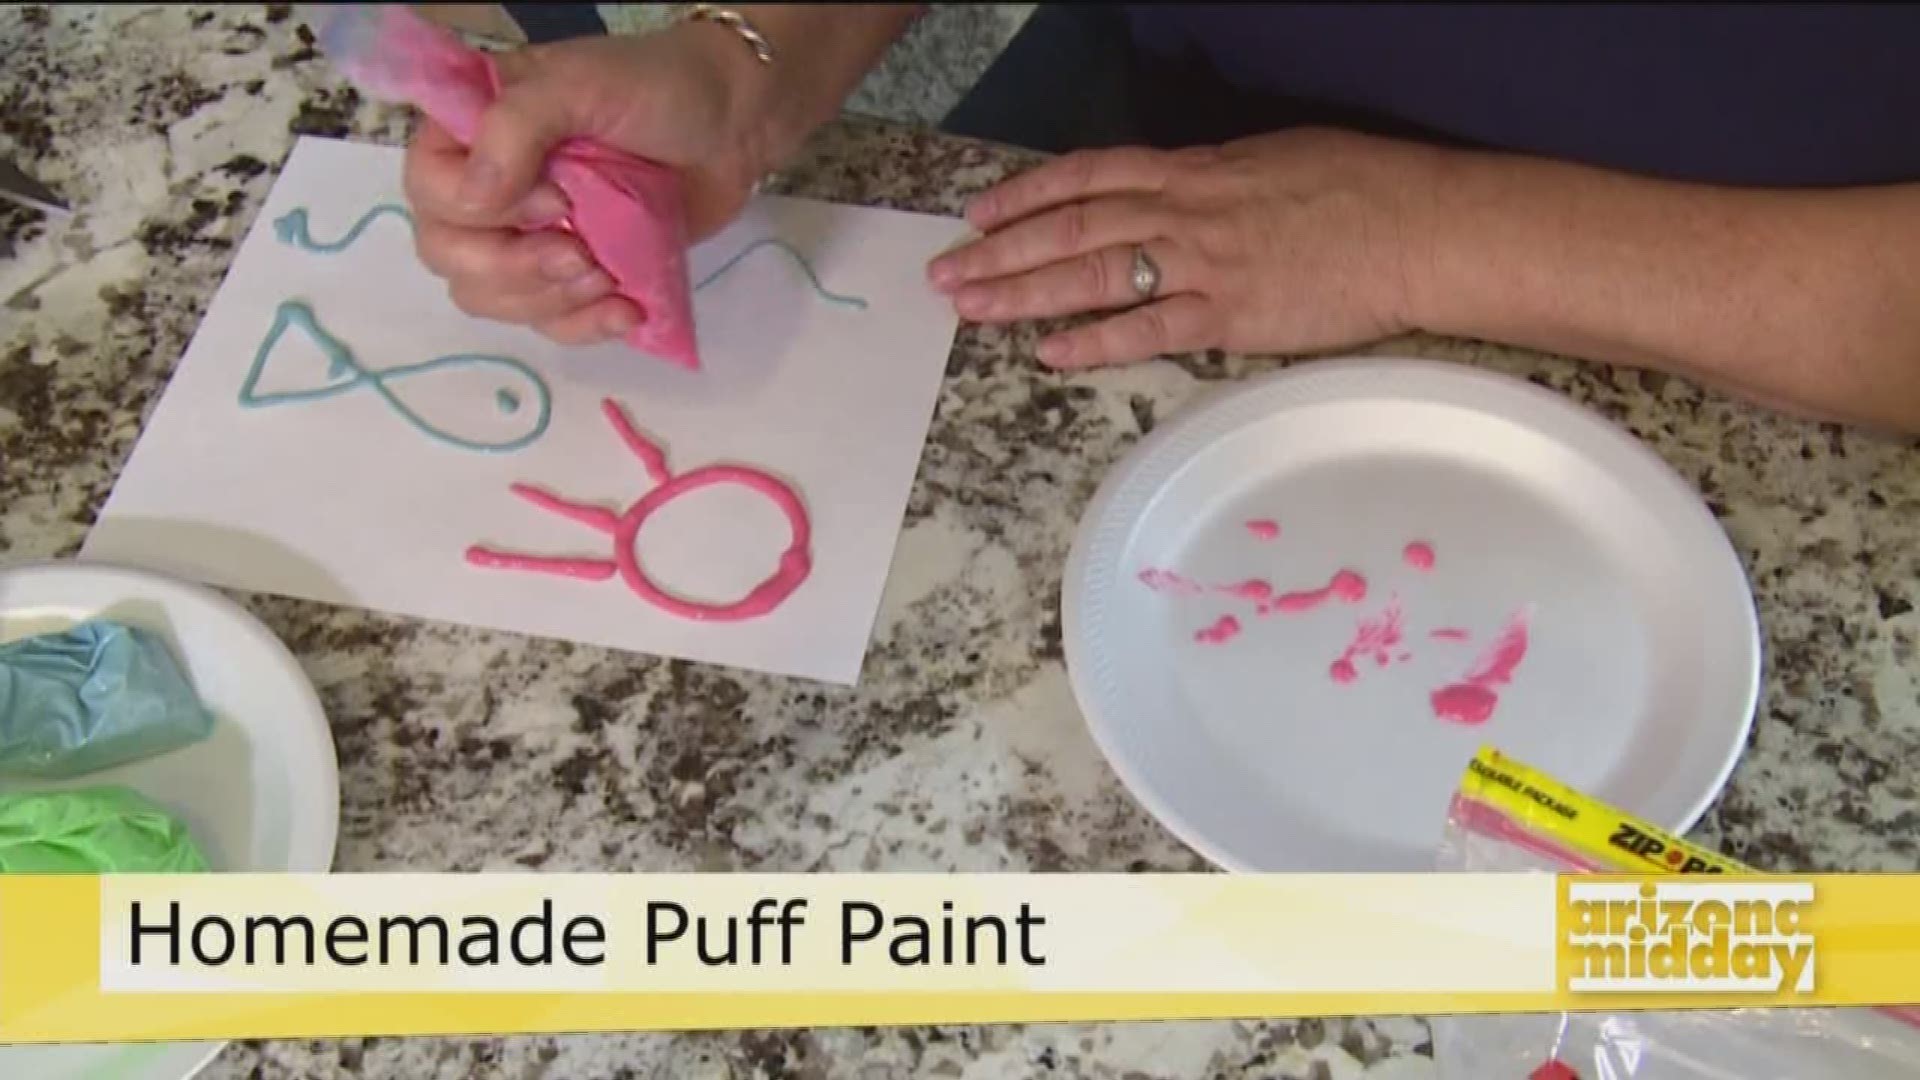 Lifestyle Expert Mala Blomquist shows us a fun way to make puff paint in the kitchen